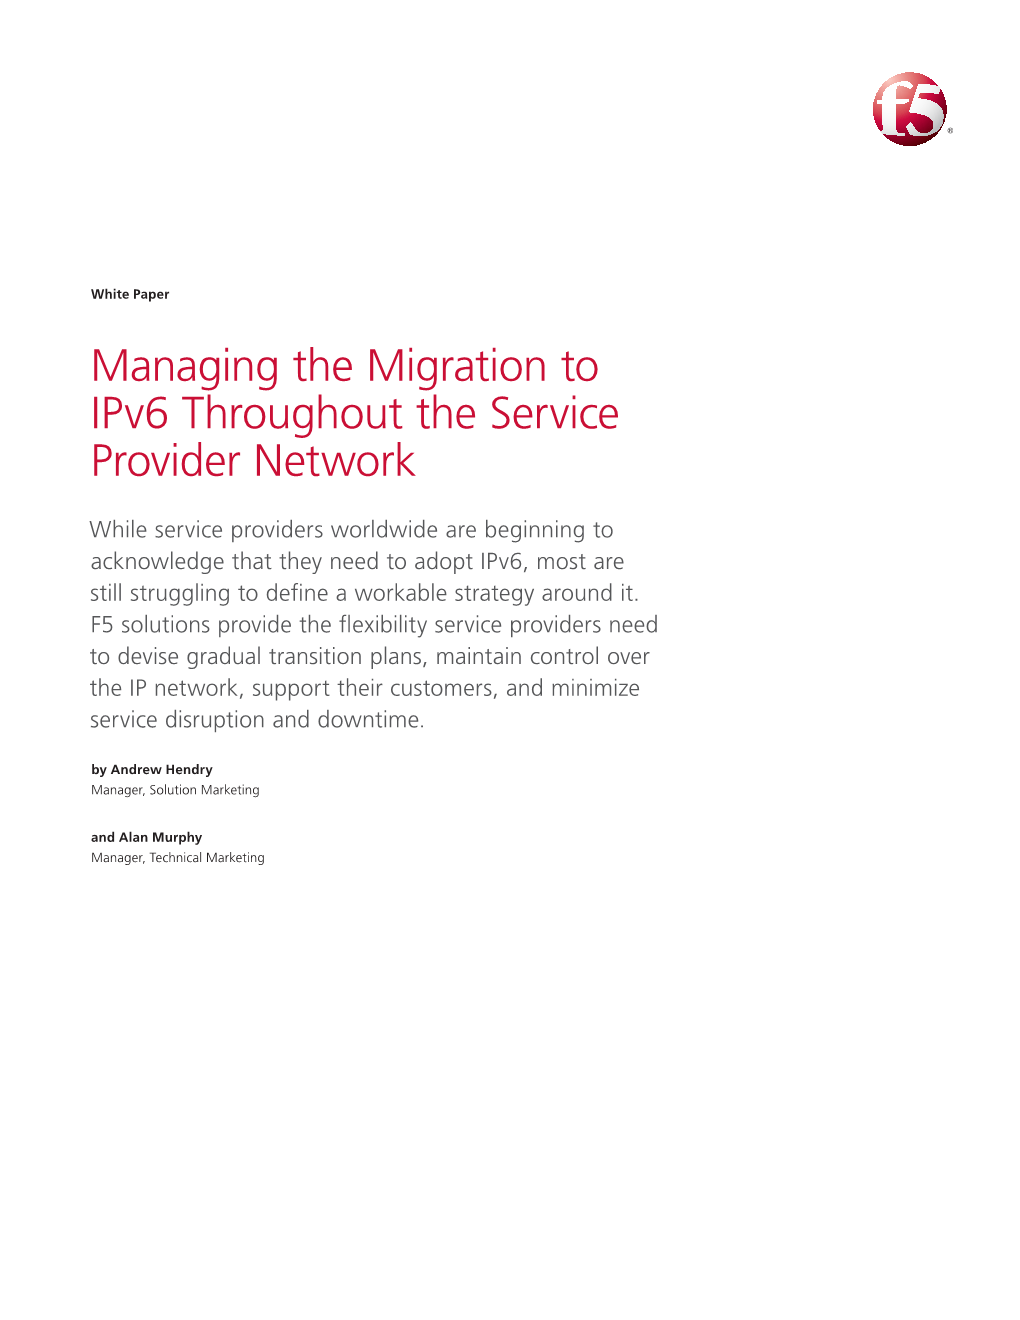 Managing the Migration to Ipv6 Throughout the Service Provider Network